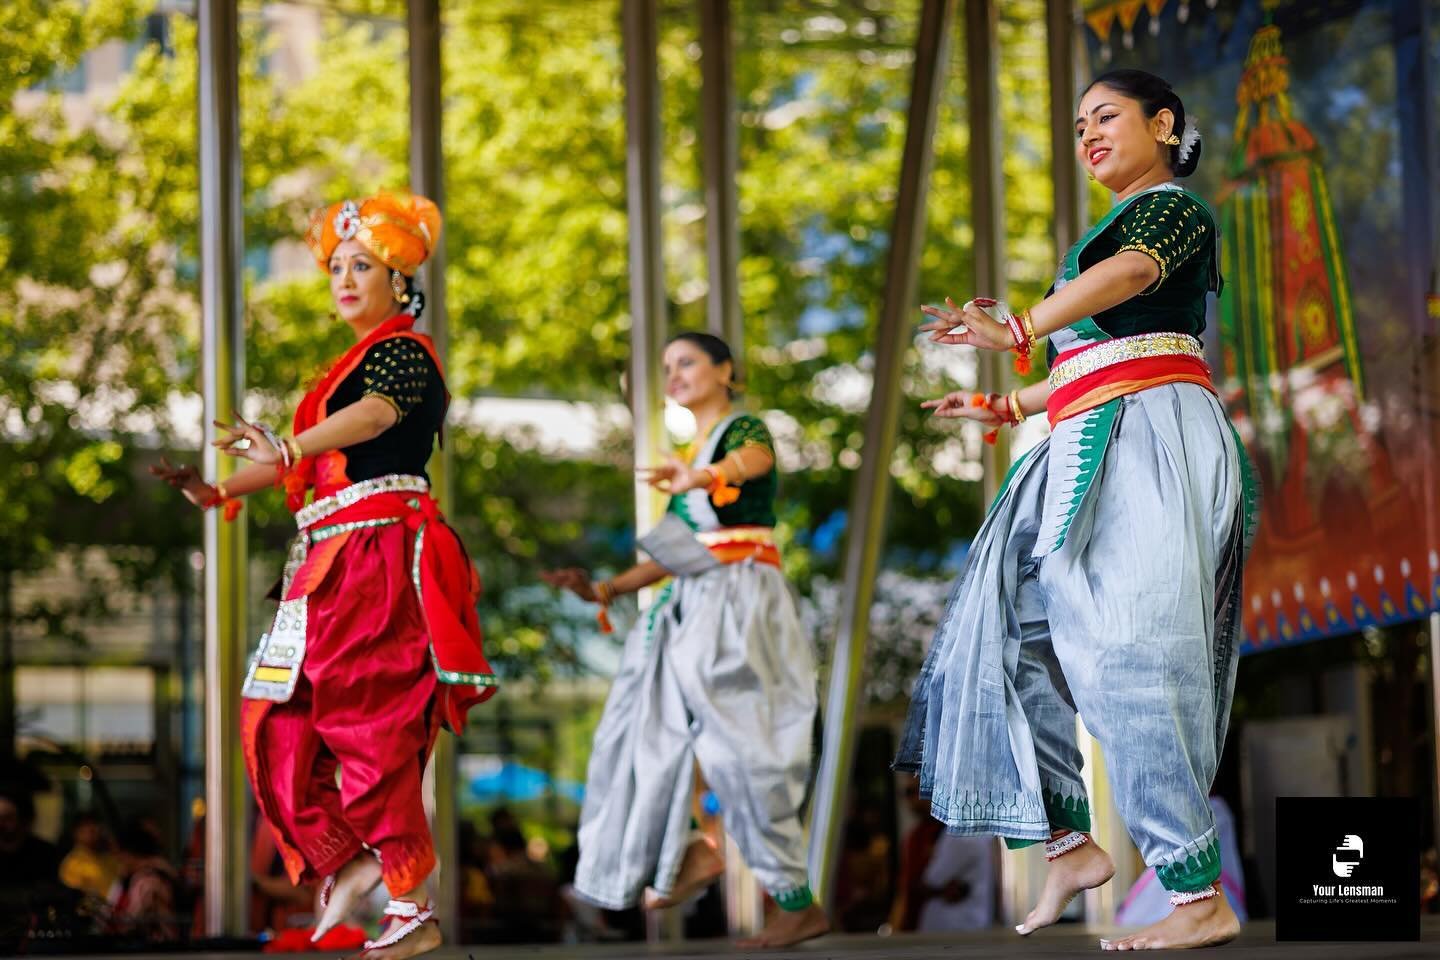 Festival of Joy
Saturday, April 27, 11 AM - 9 PM
Free admission
 Experience the sounds, sights and flavors of India at the fifth-annual Festival of Joy. From the parade on the streets to the Guara Vani concert, this family-friendly event promises a d